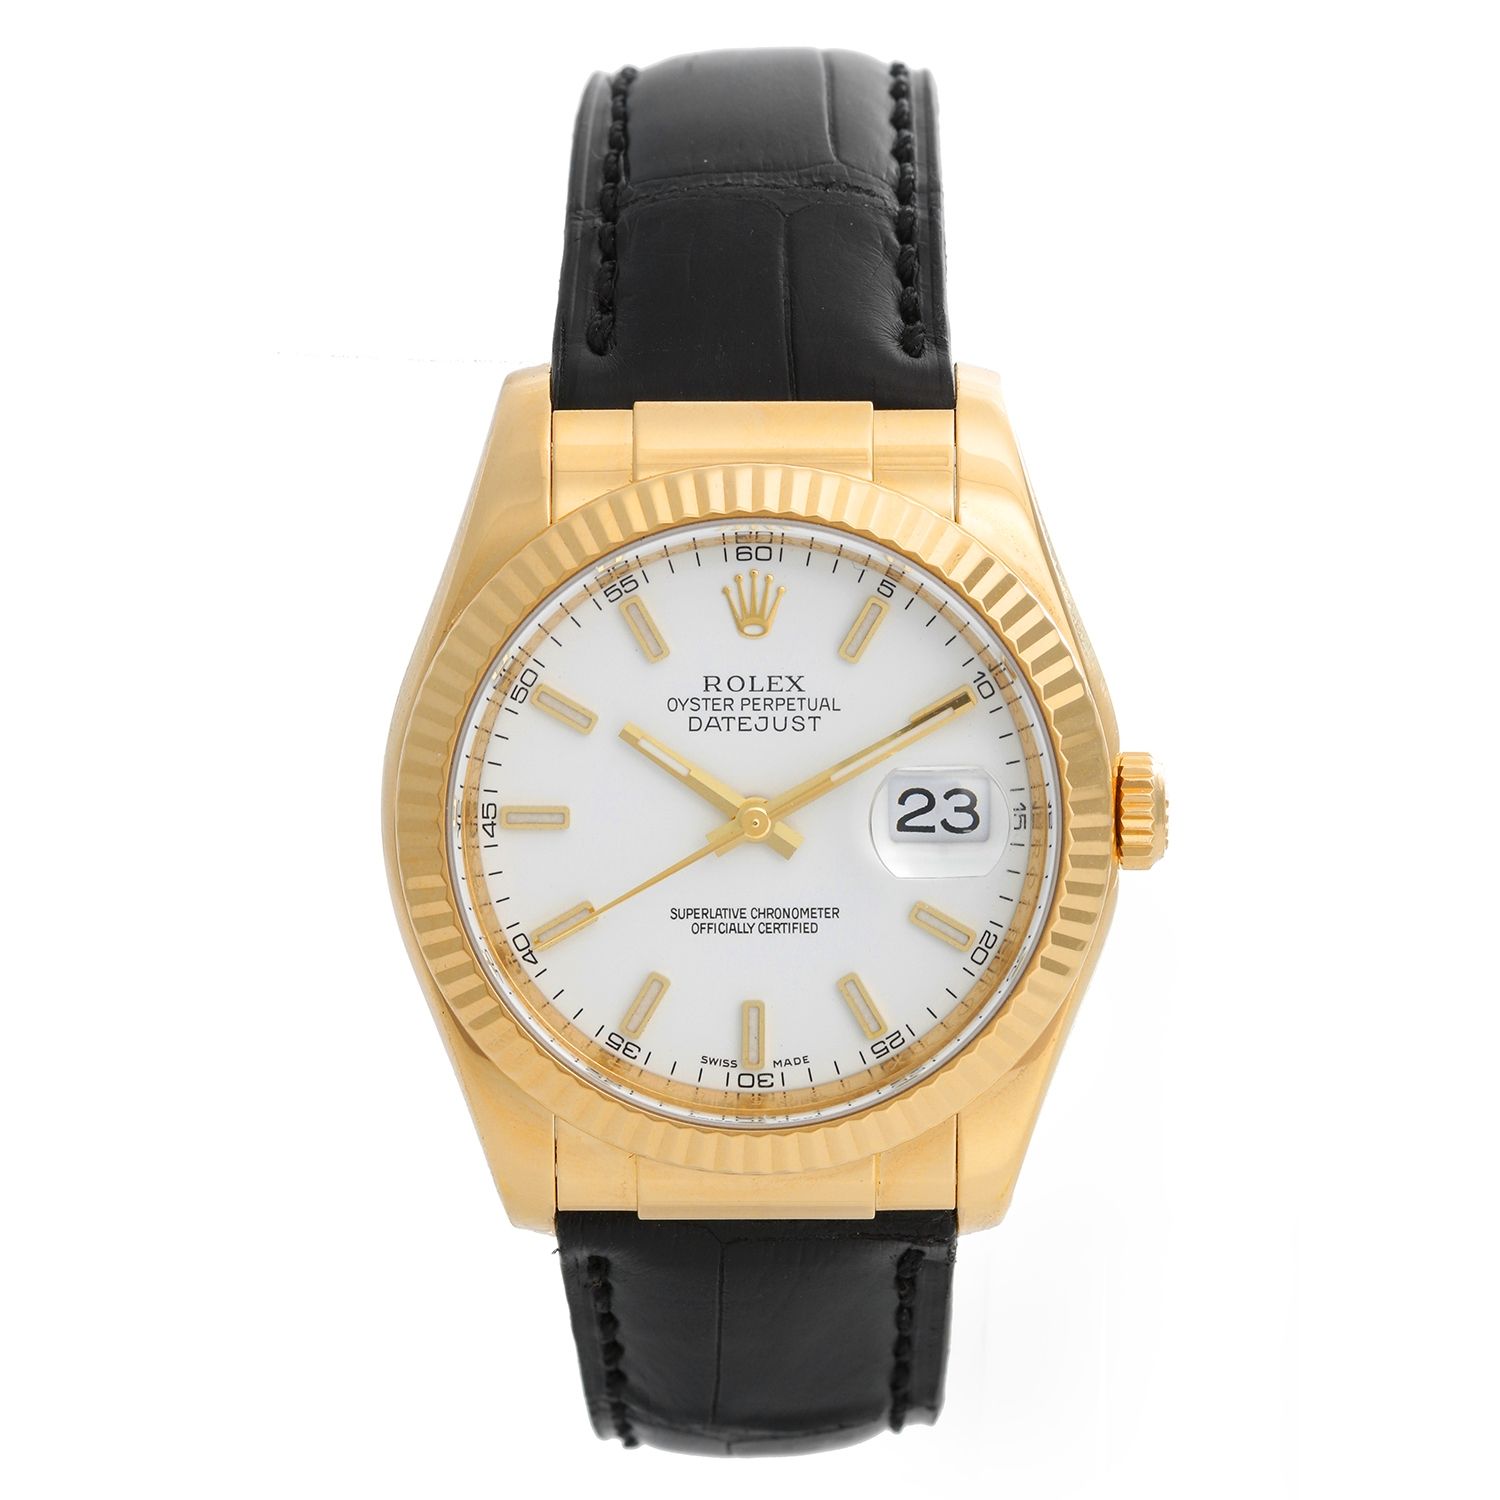 Rolex Datejust 18k Yellow Gold Men's on Leather Strap